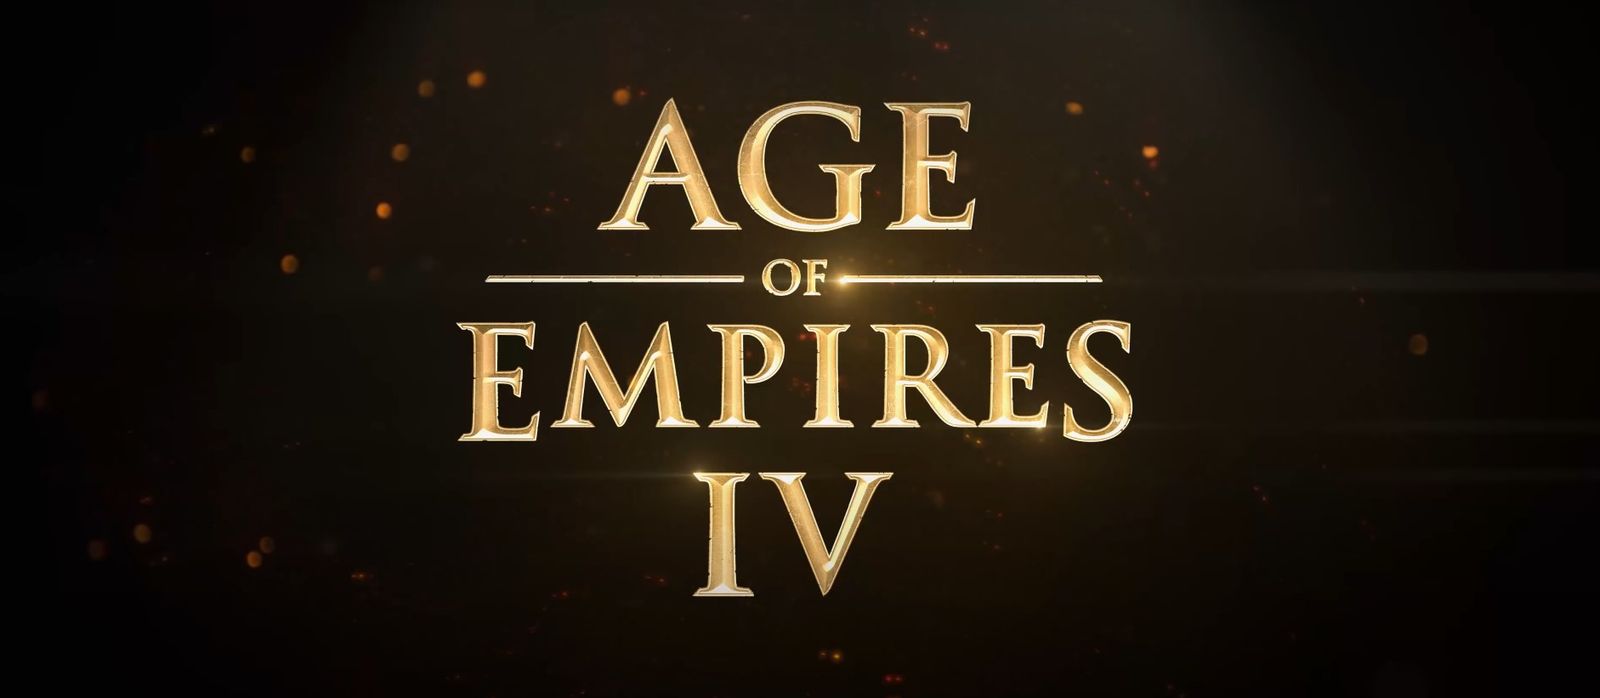 The Age of Empires 4 logo from the official gameplay trailer.